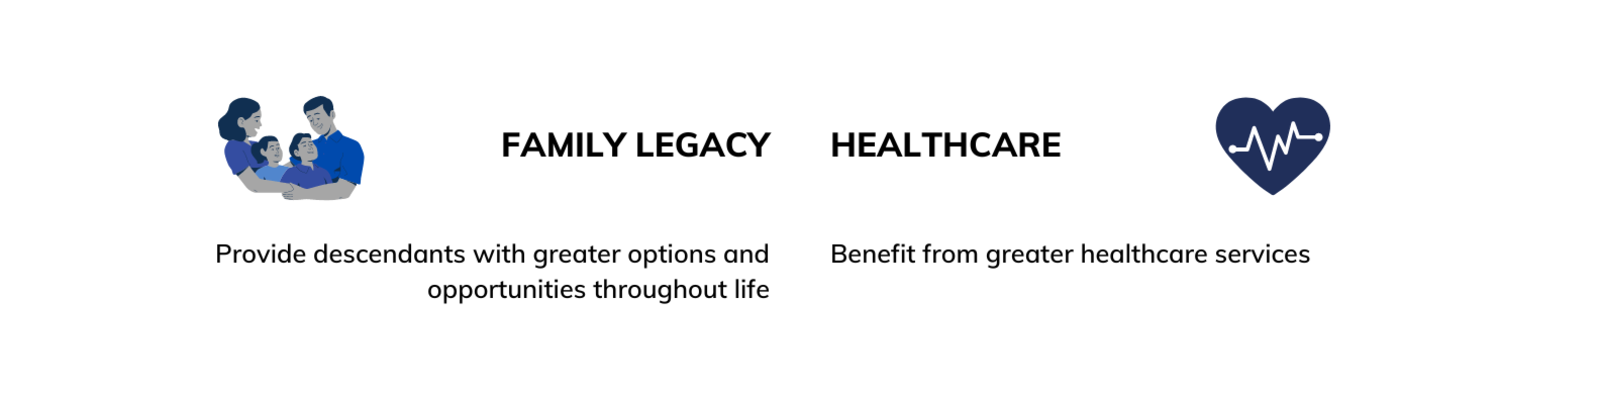 Benefits of residency and citizenship programmes - Family legacy and healthcare